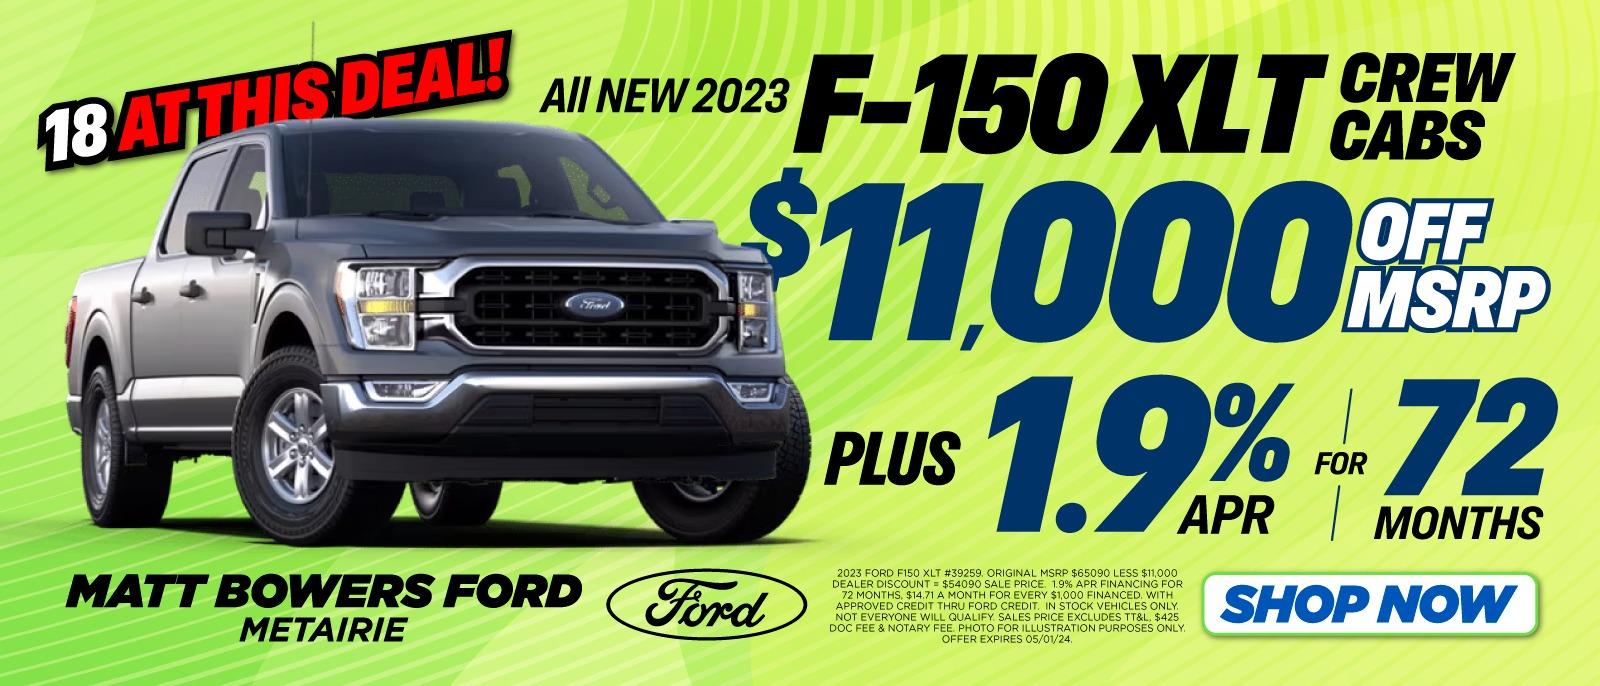 2023 Ford F-150 XLT Deal